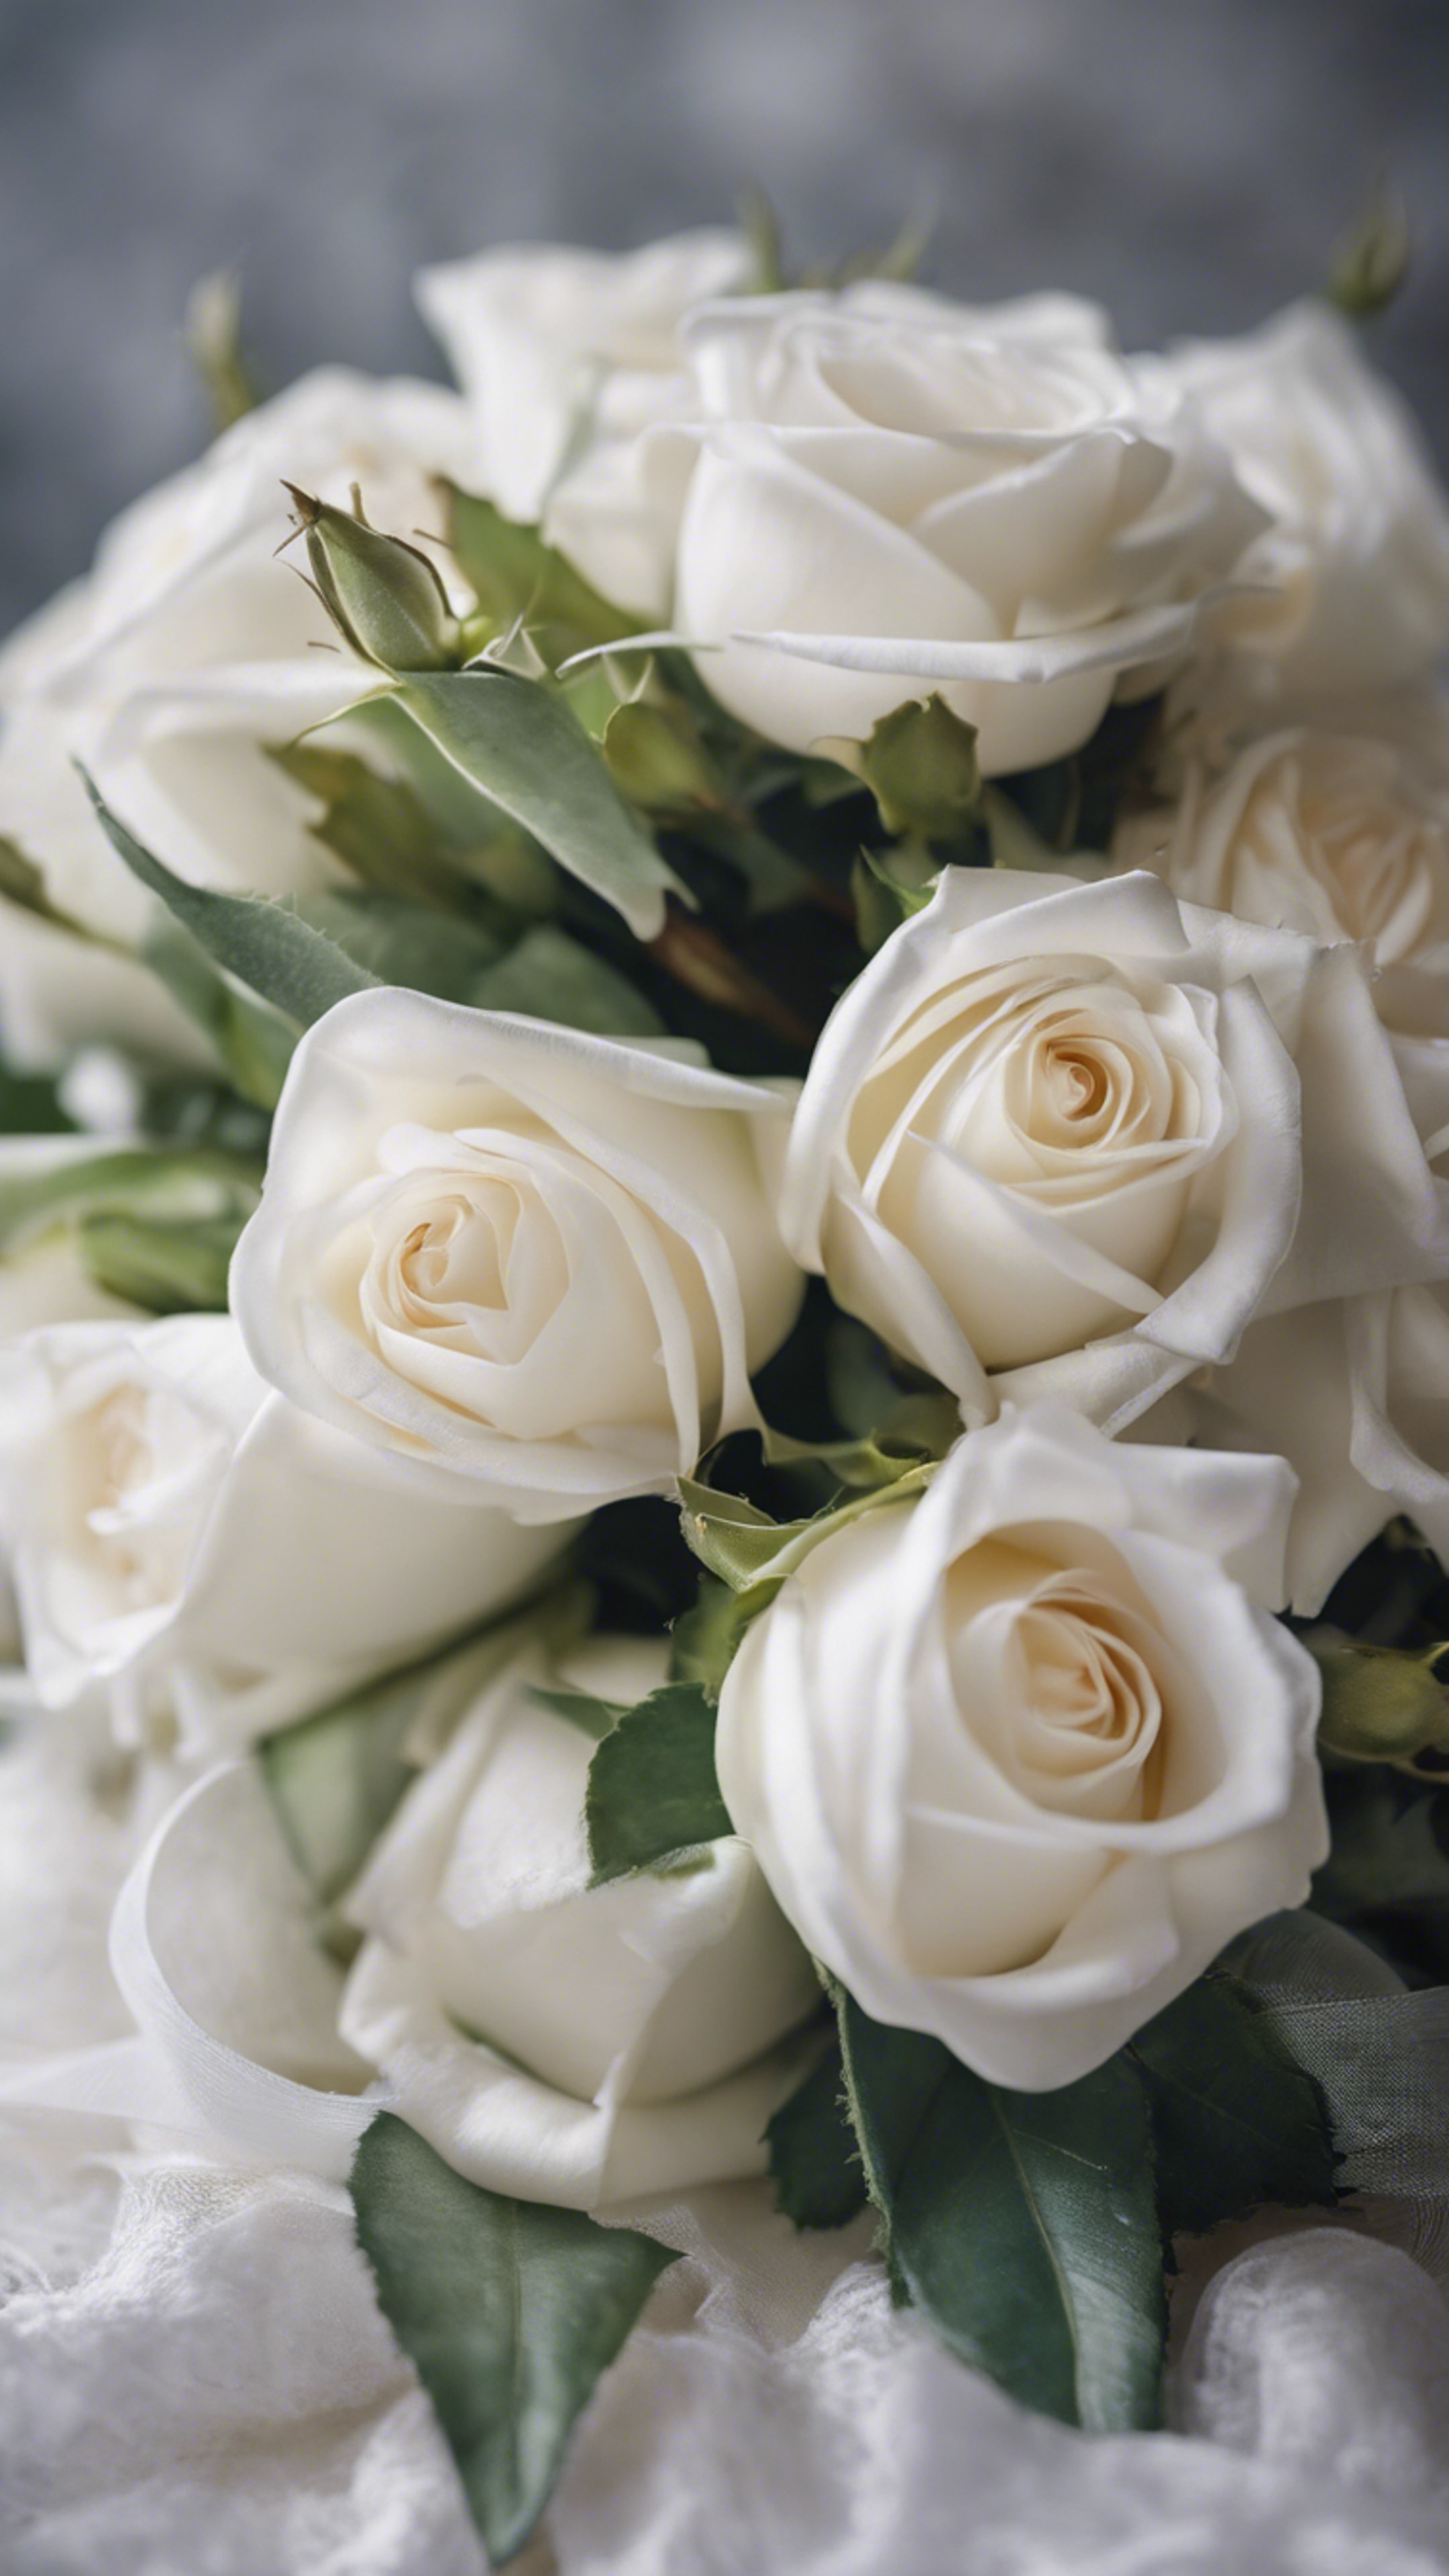 A bouquet of white roses wrapped in sheer white satin ribbon. Hình nền[5223d8c249ea42cfaf4b]